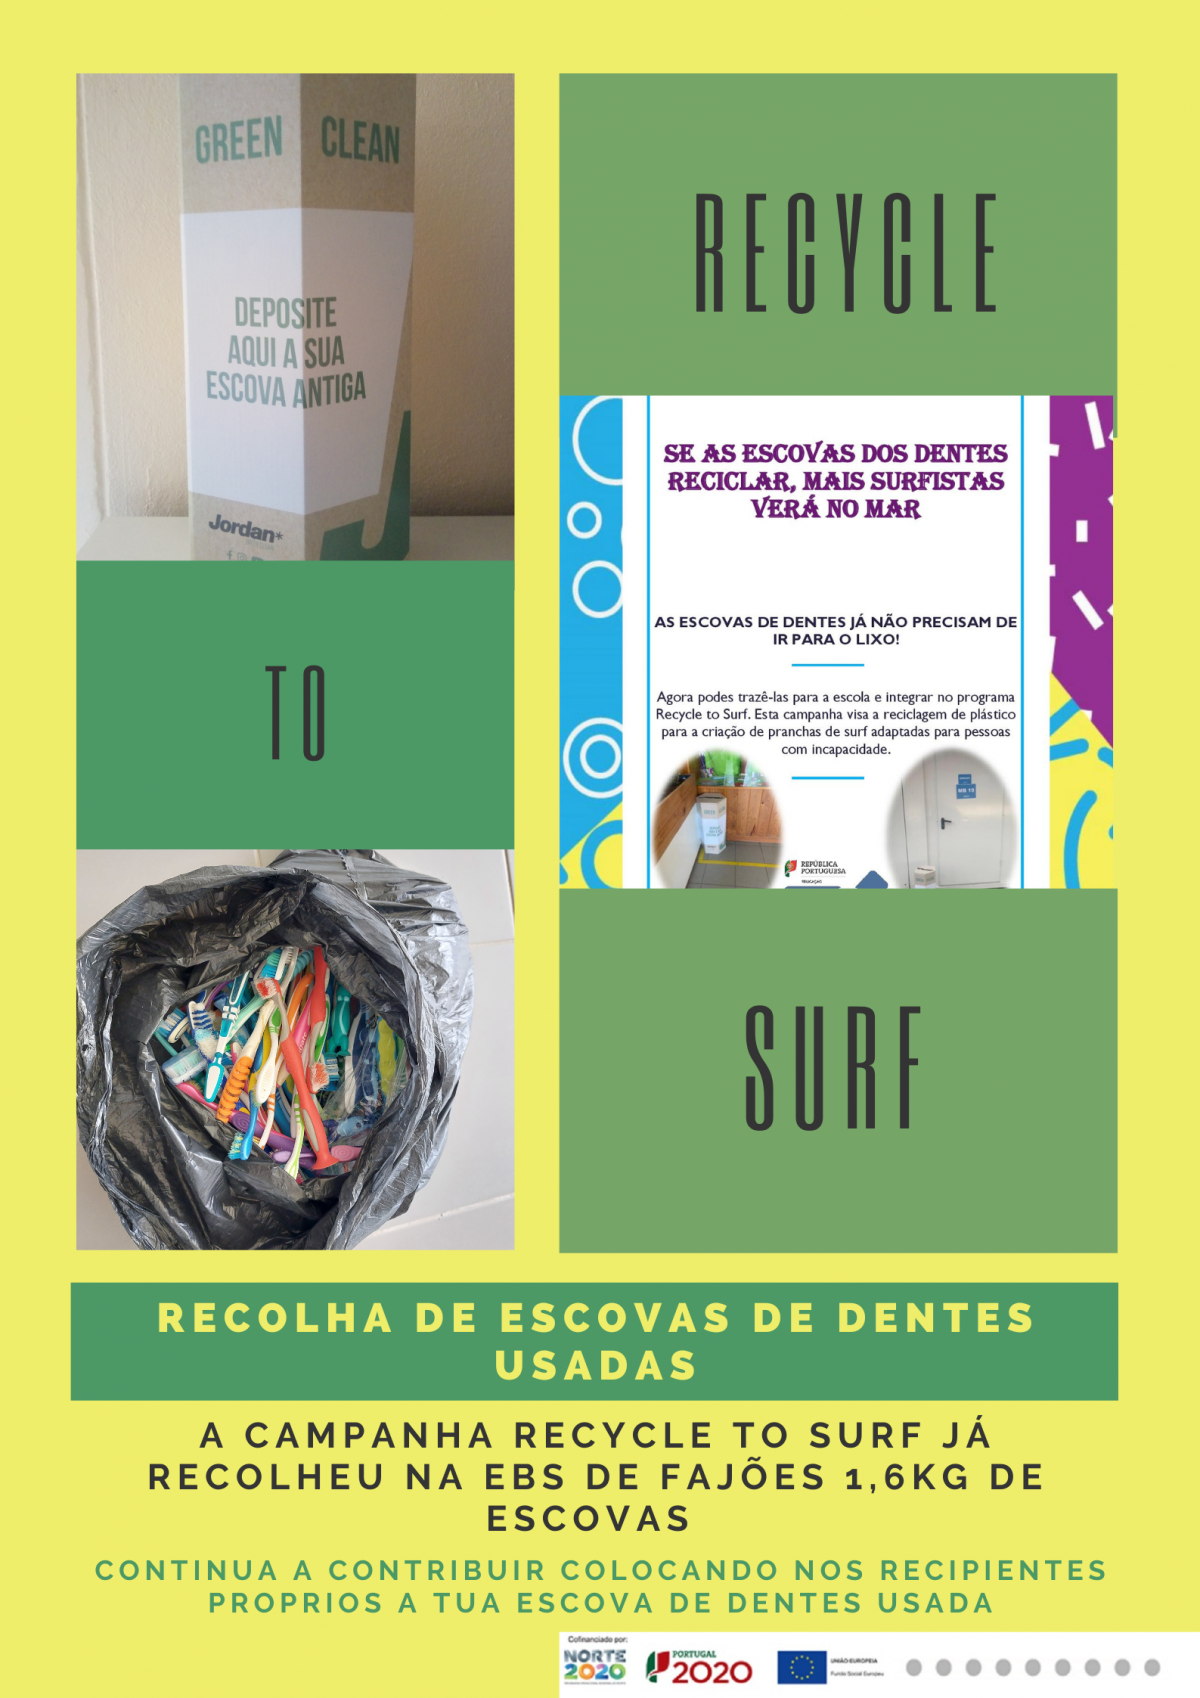 Recycle to surf